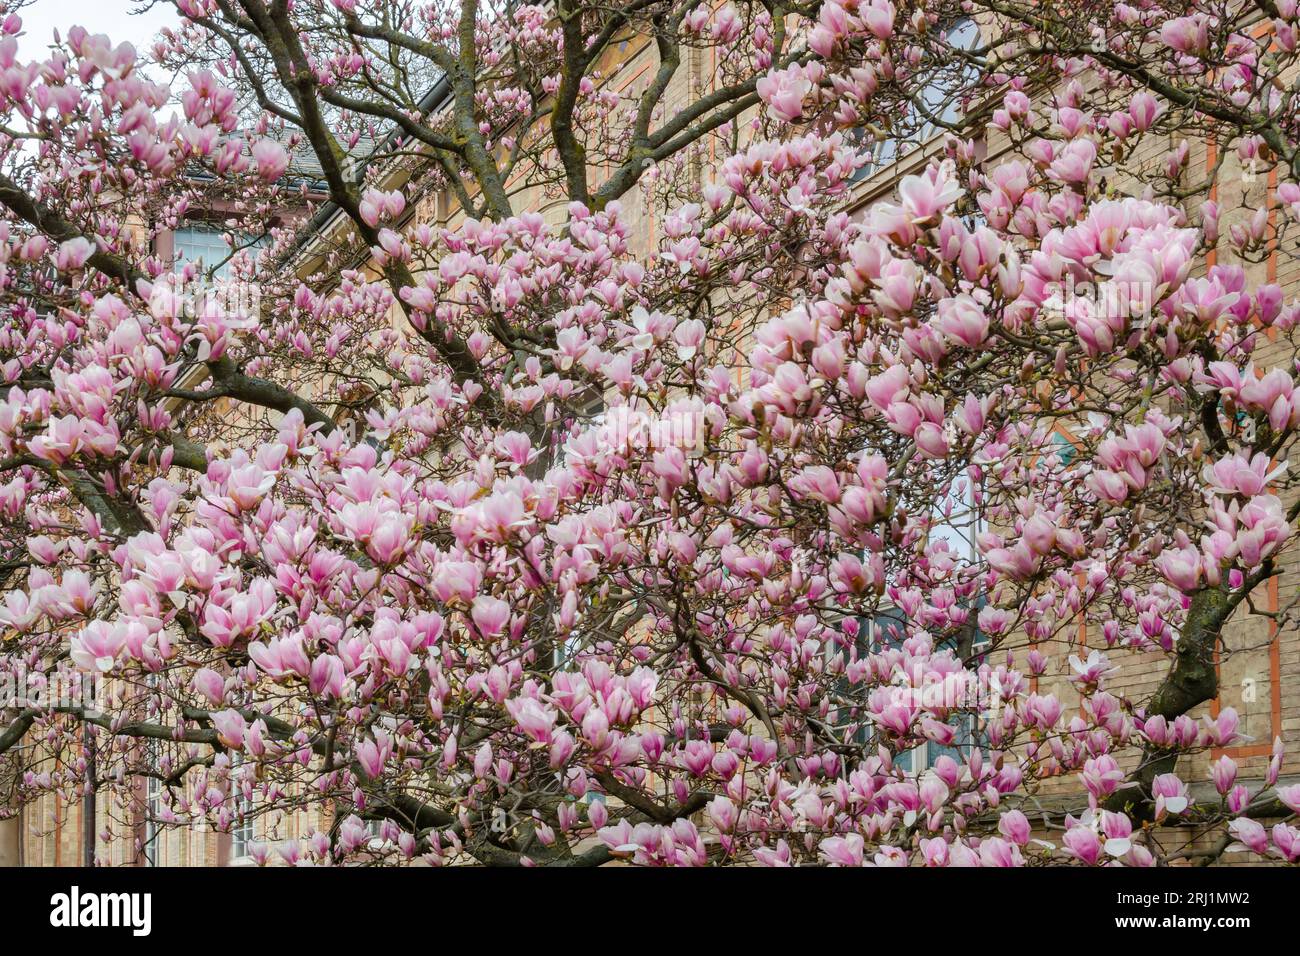 Magnolia tree blooms in the city Stock Photo